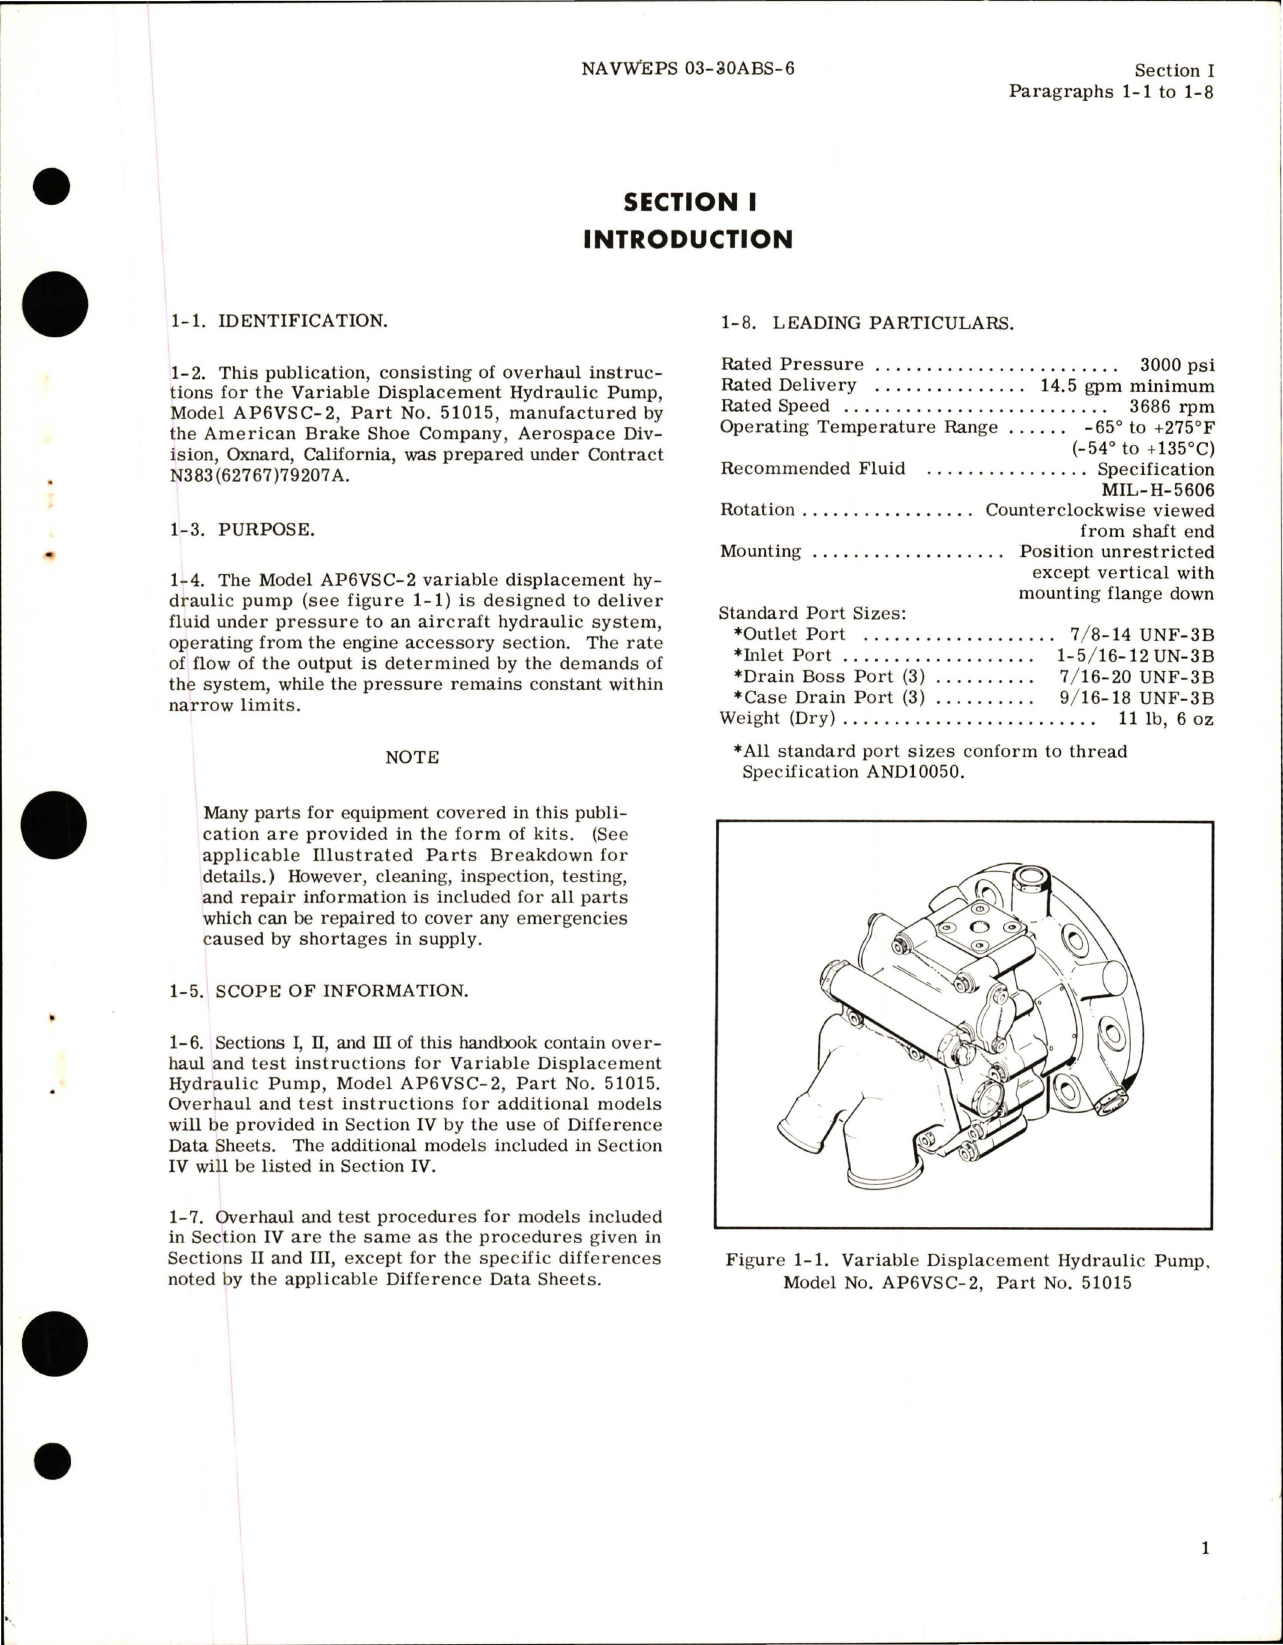 Sample page 5 from AirCorps Library document: Overhaul Instructions for Variable Displacement Hydraulic Pump - Model AP6VSC-2 - Part 51015